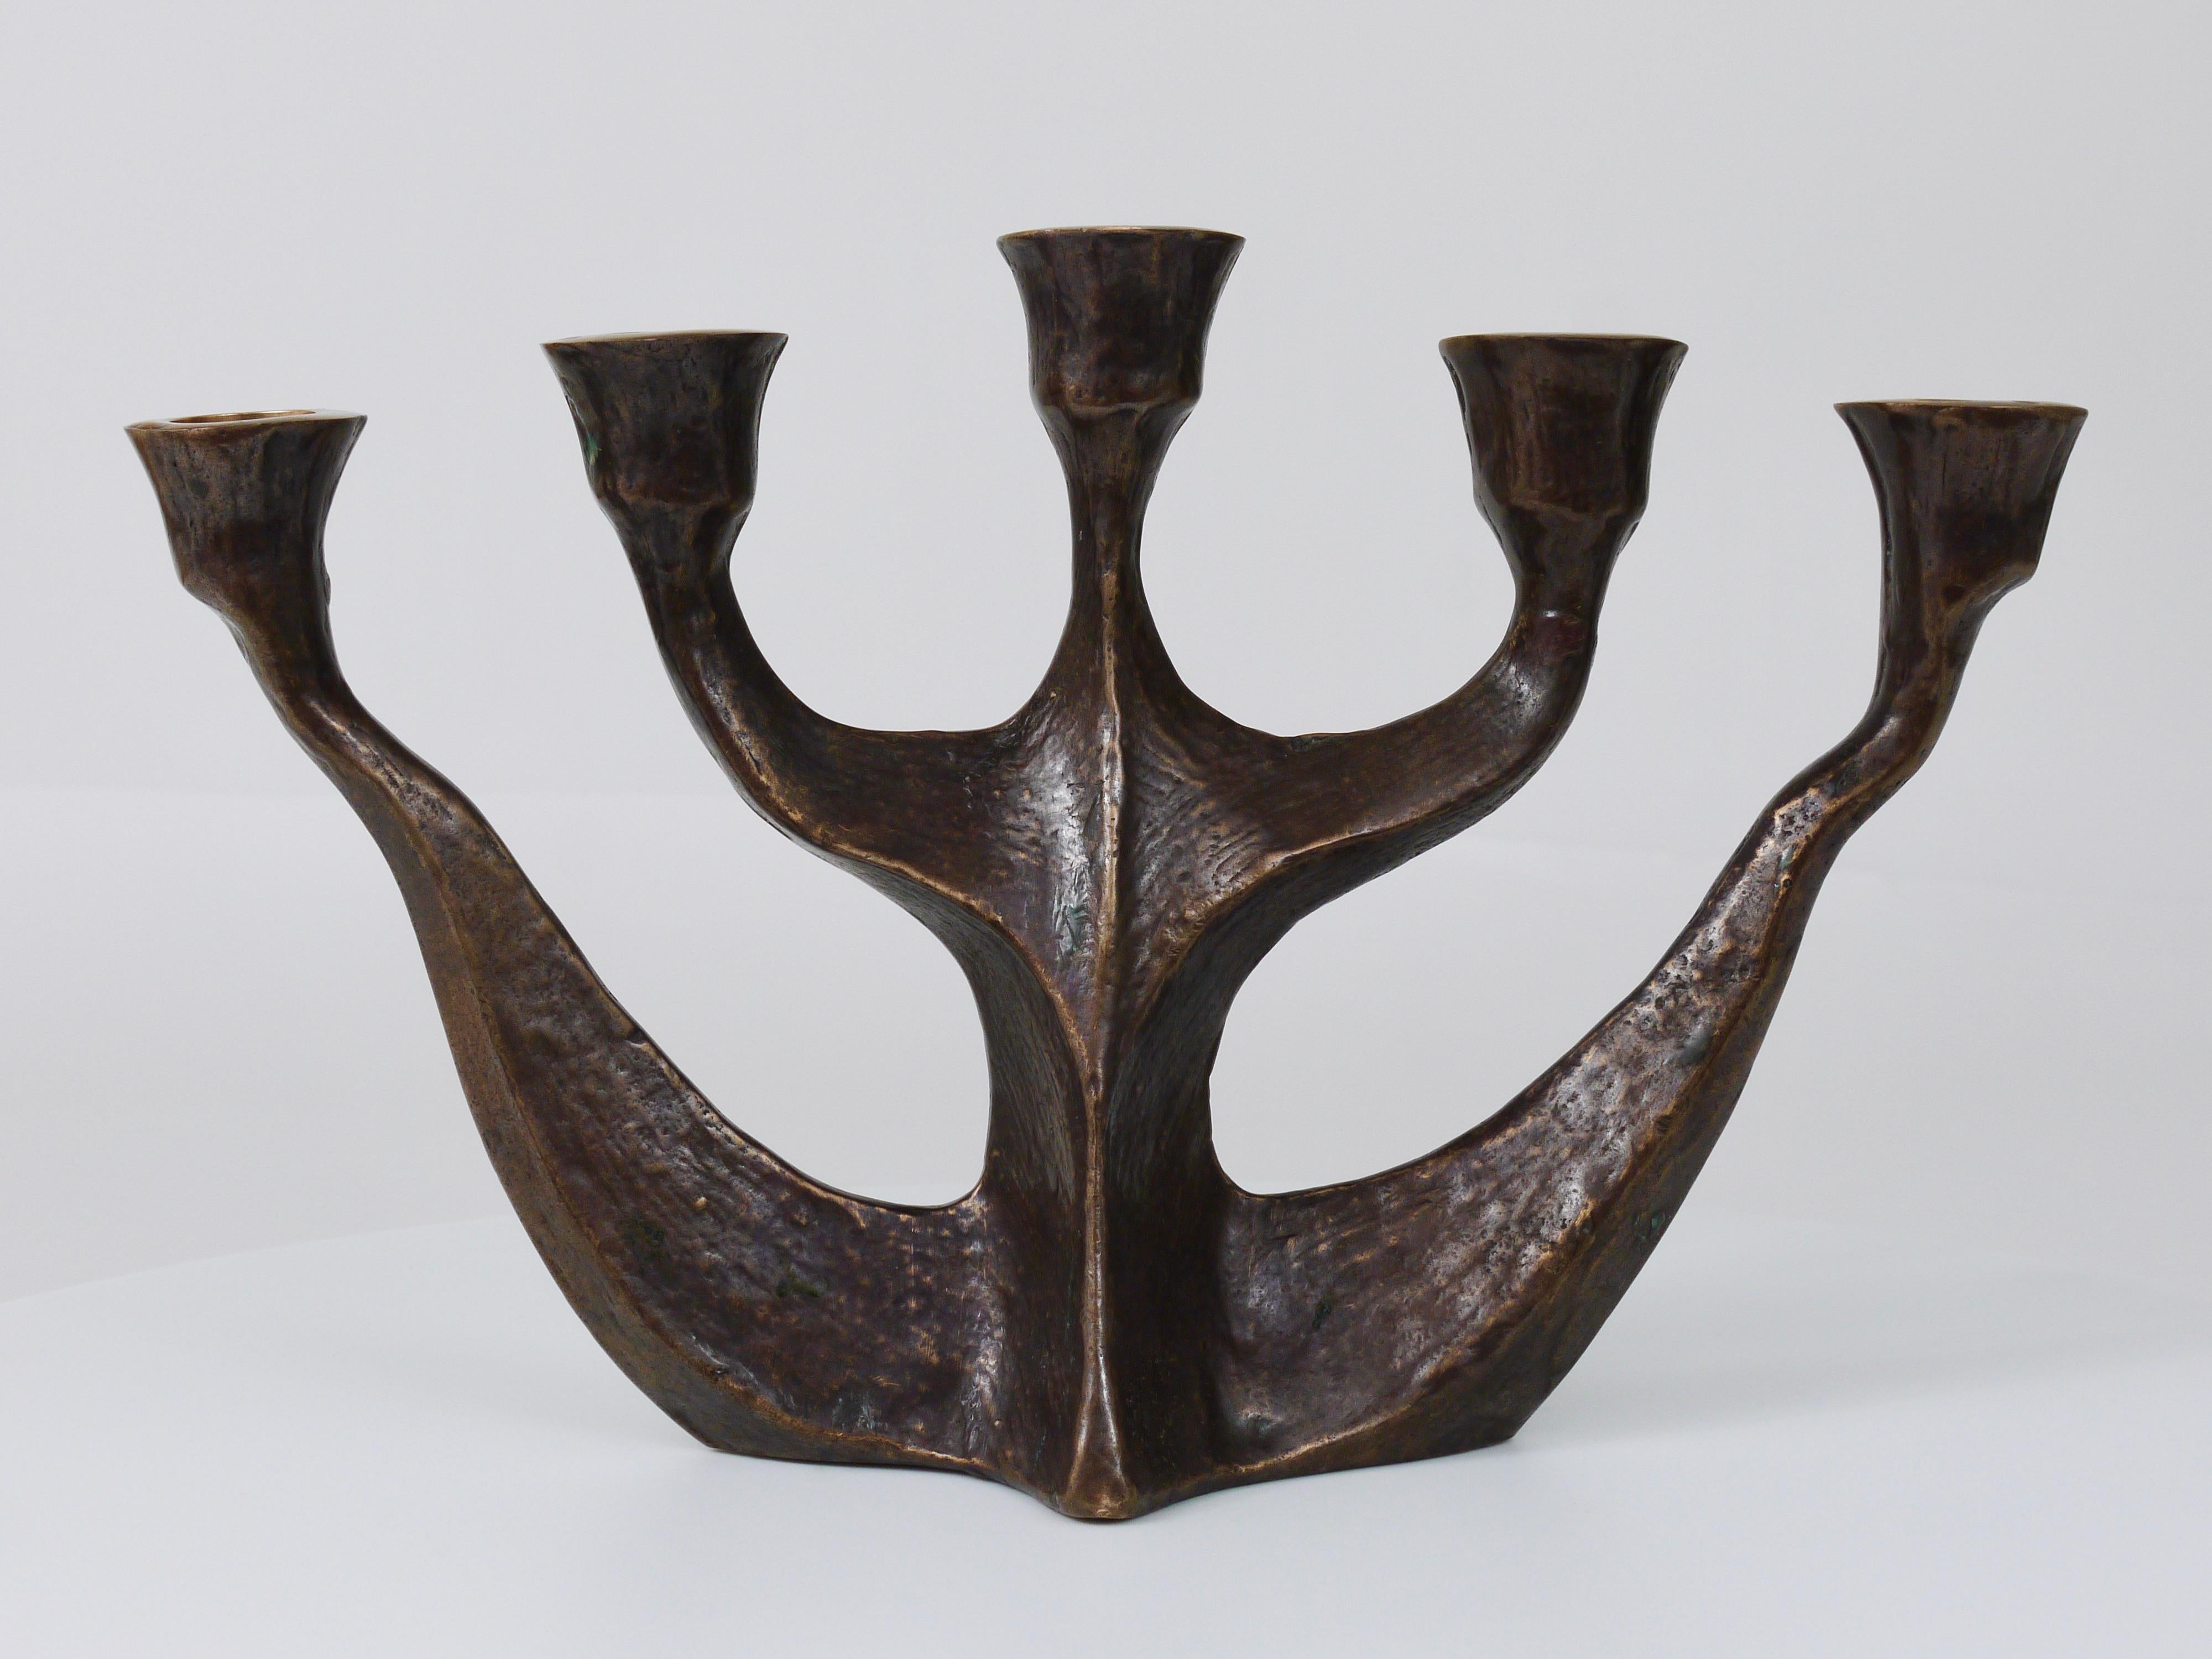 Up to Two Midcentury Brutalist Bronze Candleholders by Michael Harjes, 1960s For Sale 14